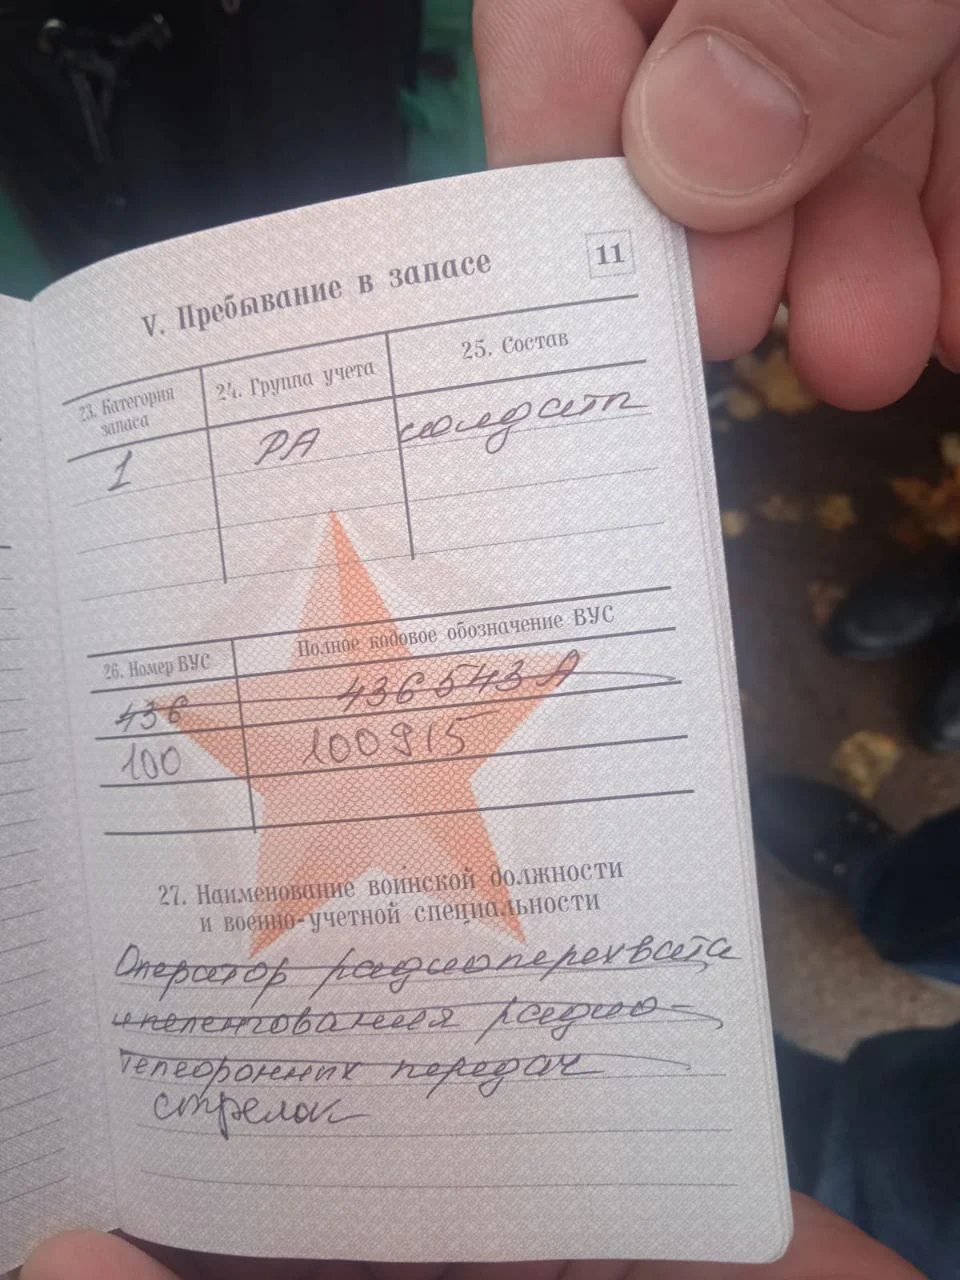 Khoroshev’s military ID with a different military specialty. Photo provided by Khoroshev himslef